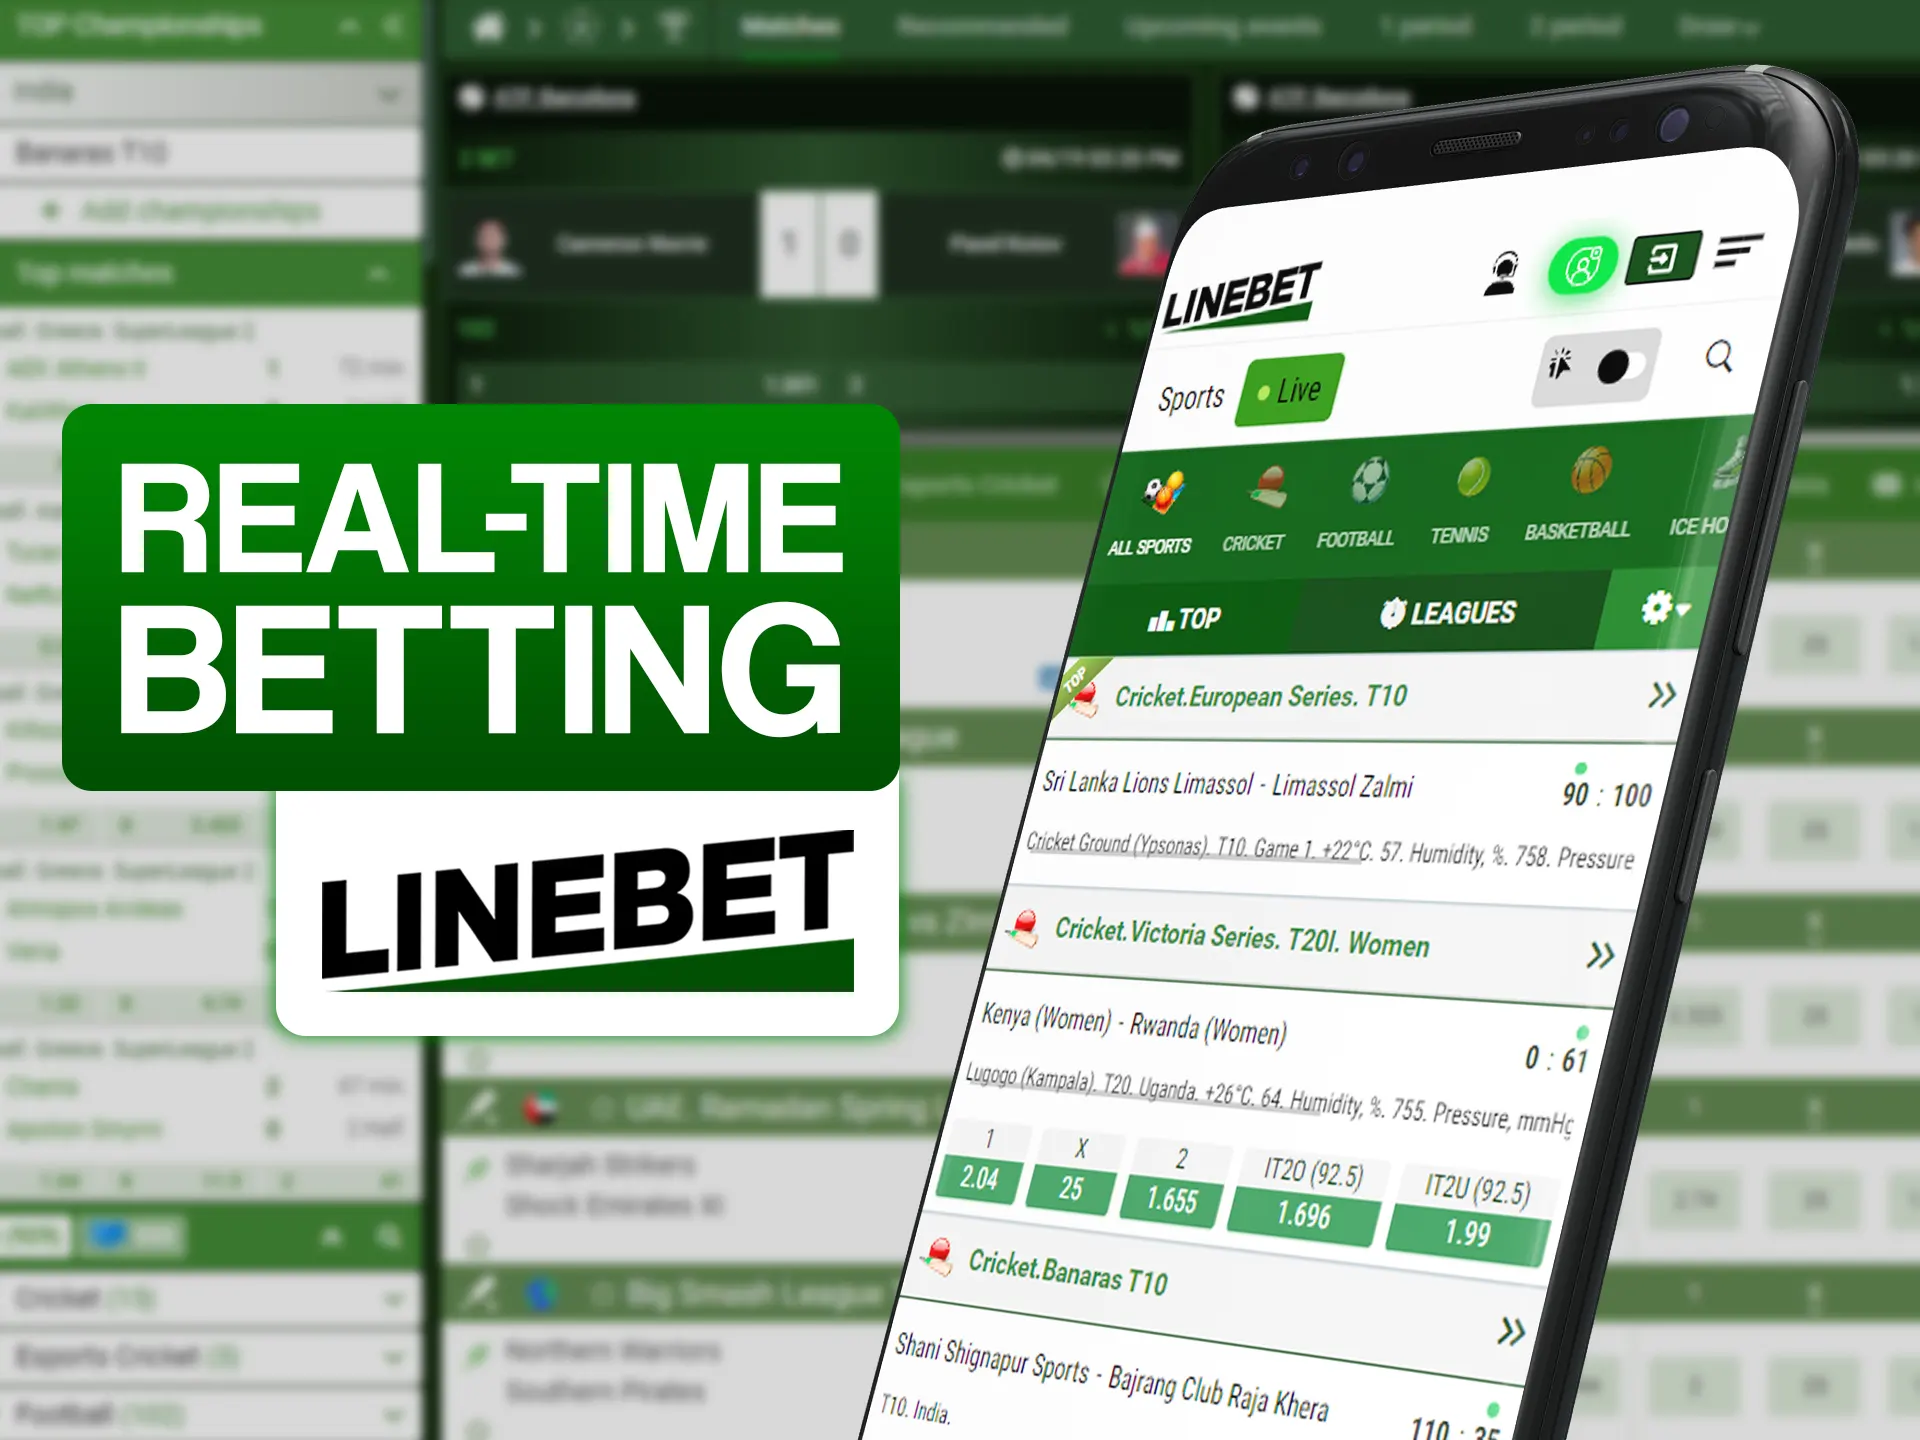 Bet on multiple ongoing matches and win at Linebet.